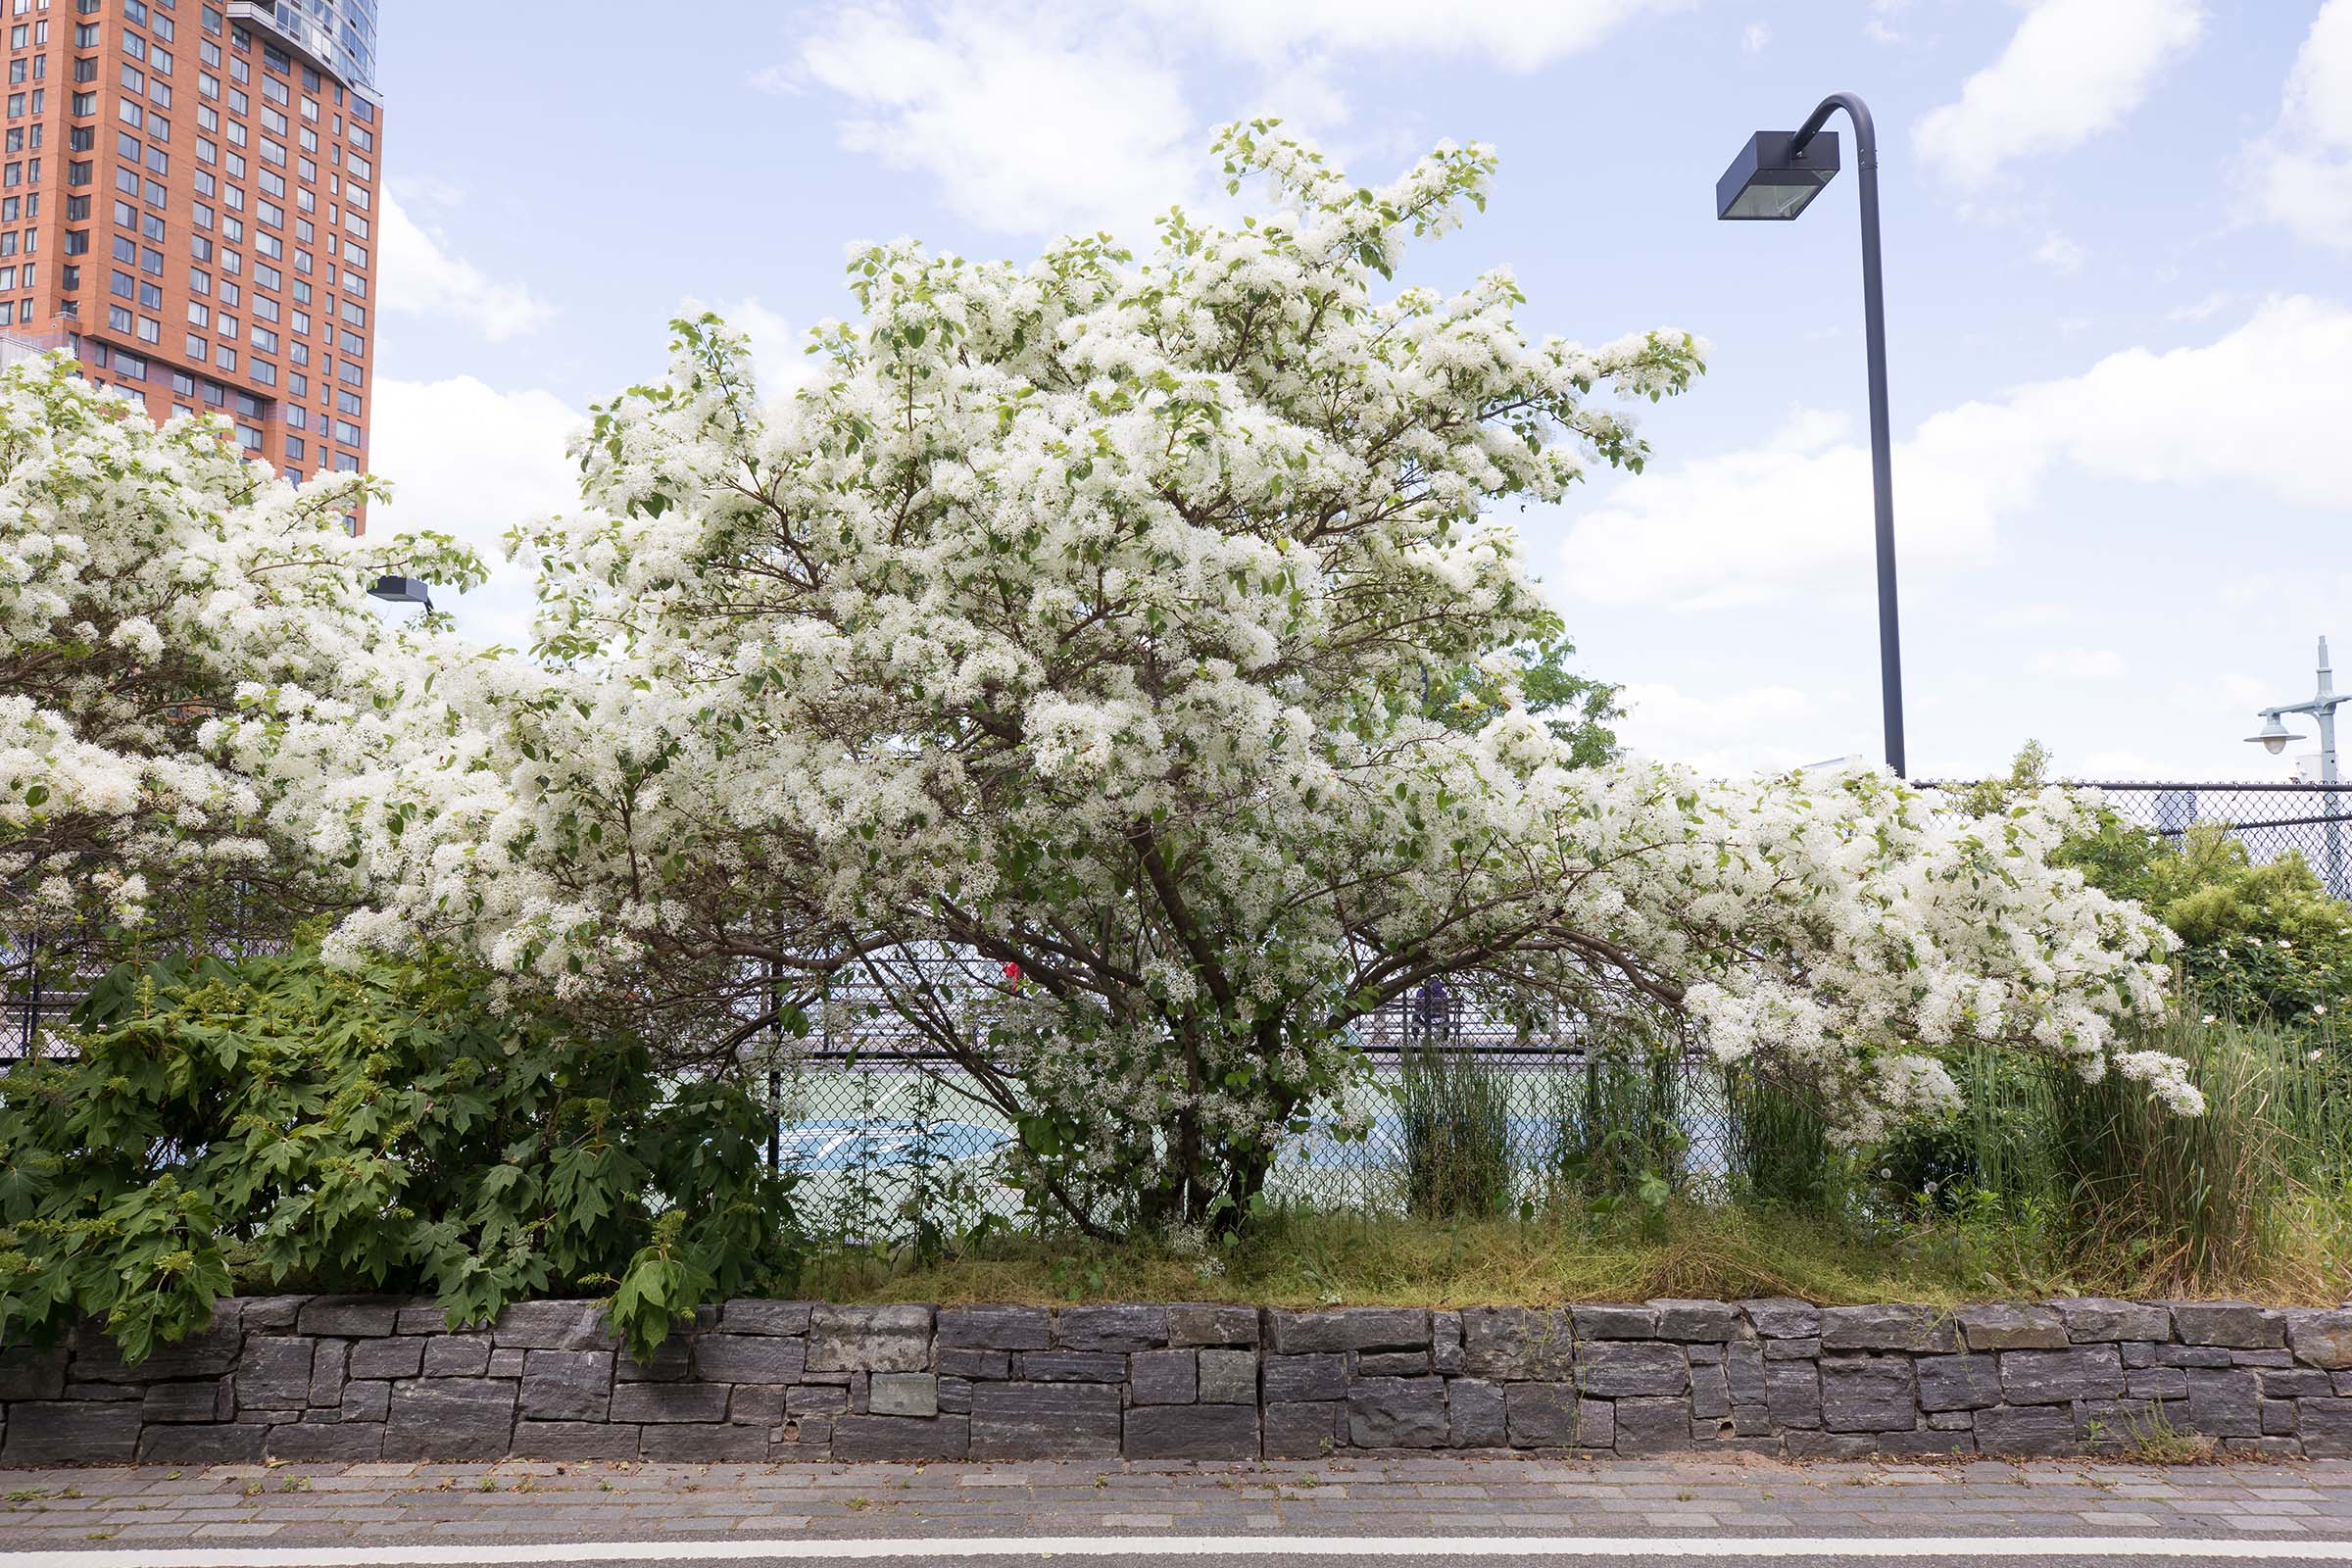 The white blossoms on the White Fringe Tree are fragrant and have multiple lines on their blossoms